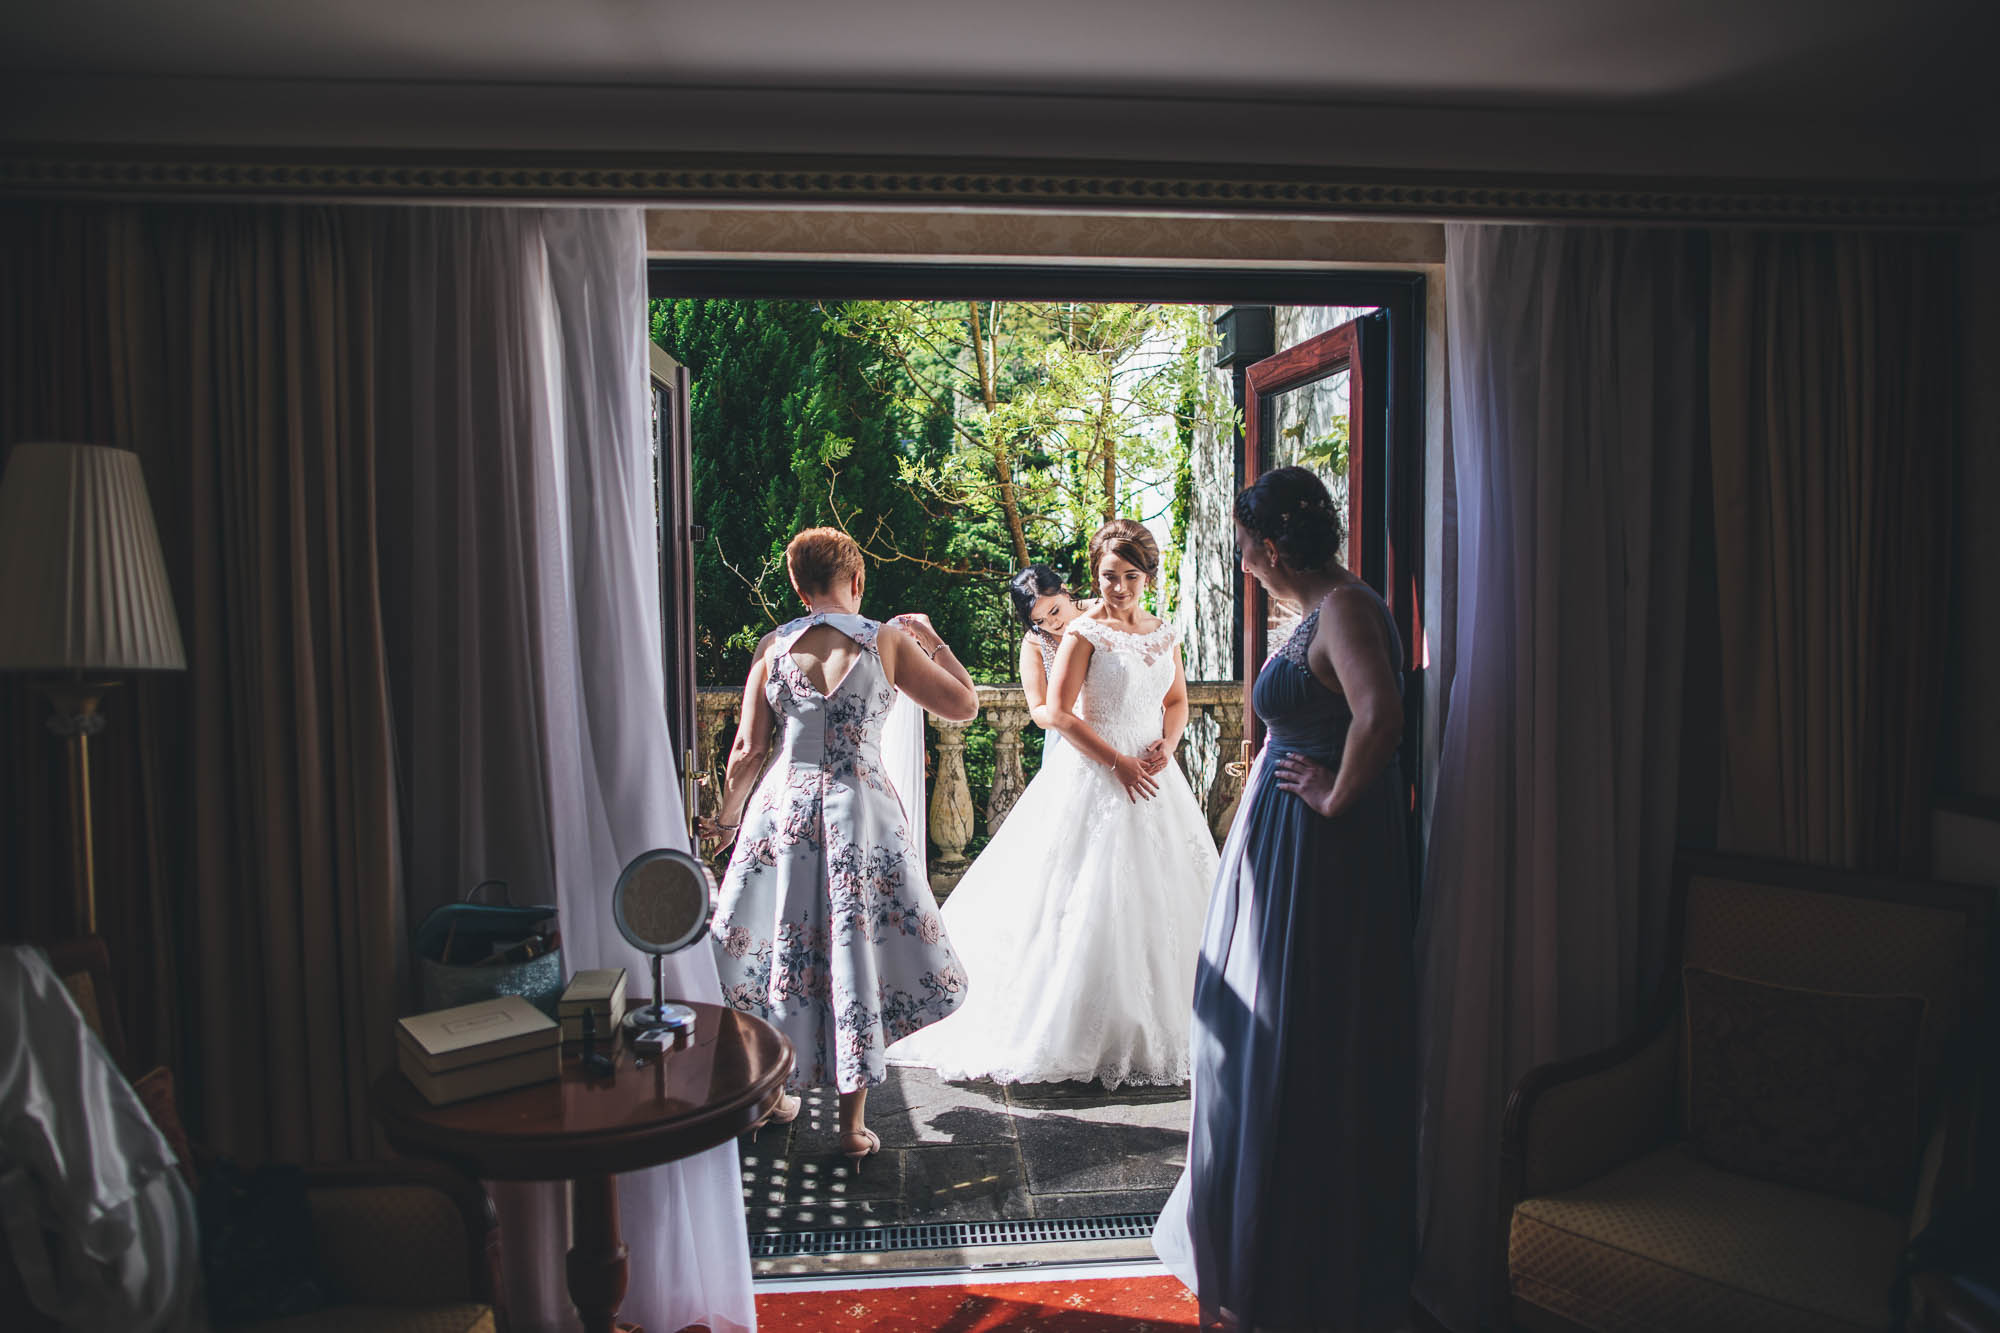 Wide shot looking outside to Bride and her Bridal party making adjustments before wedding ceremony